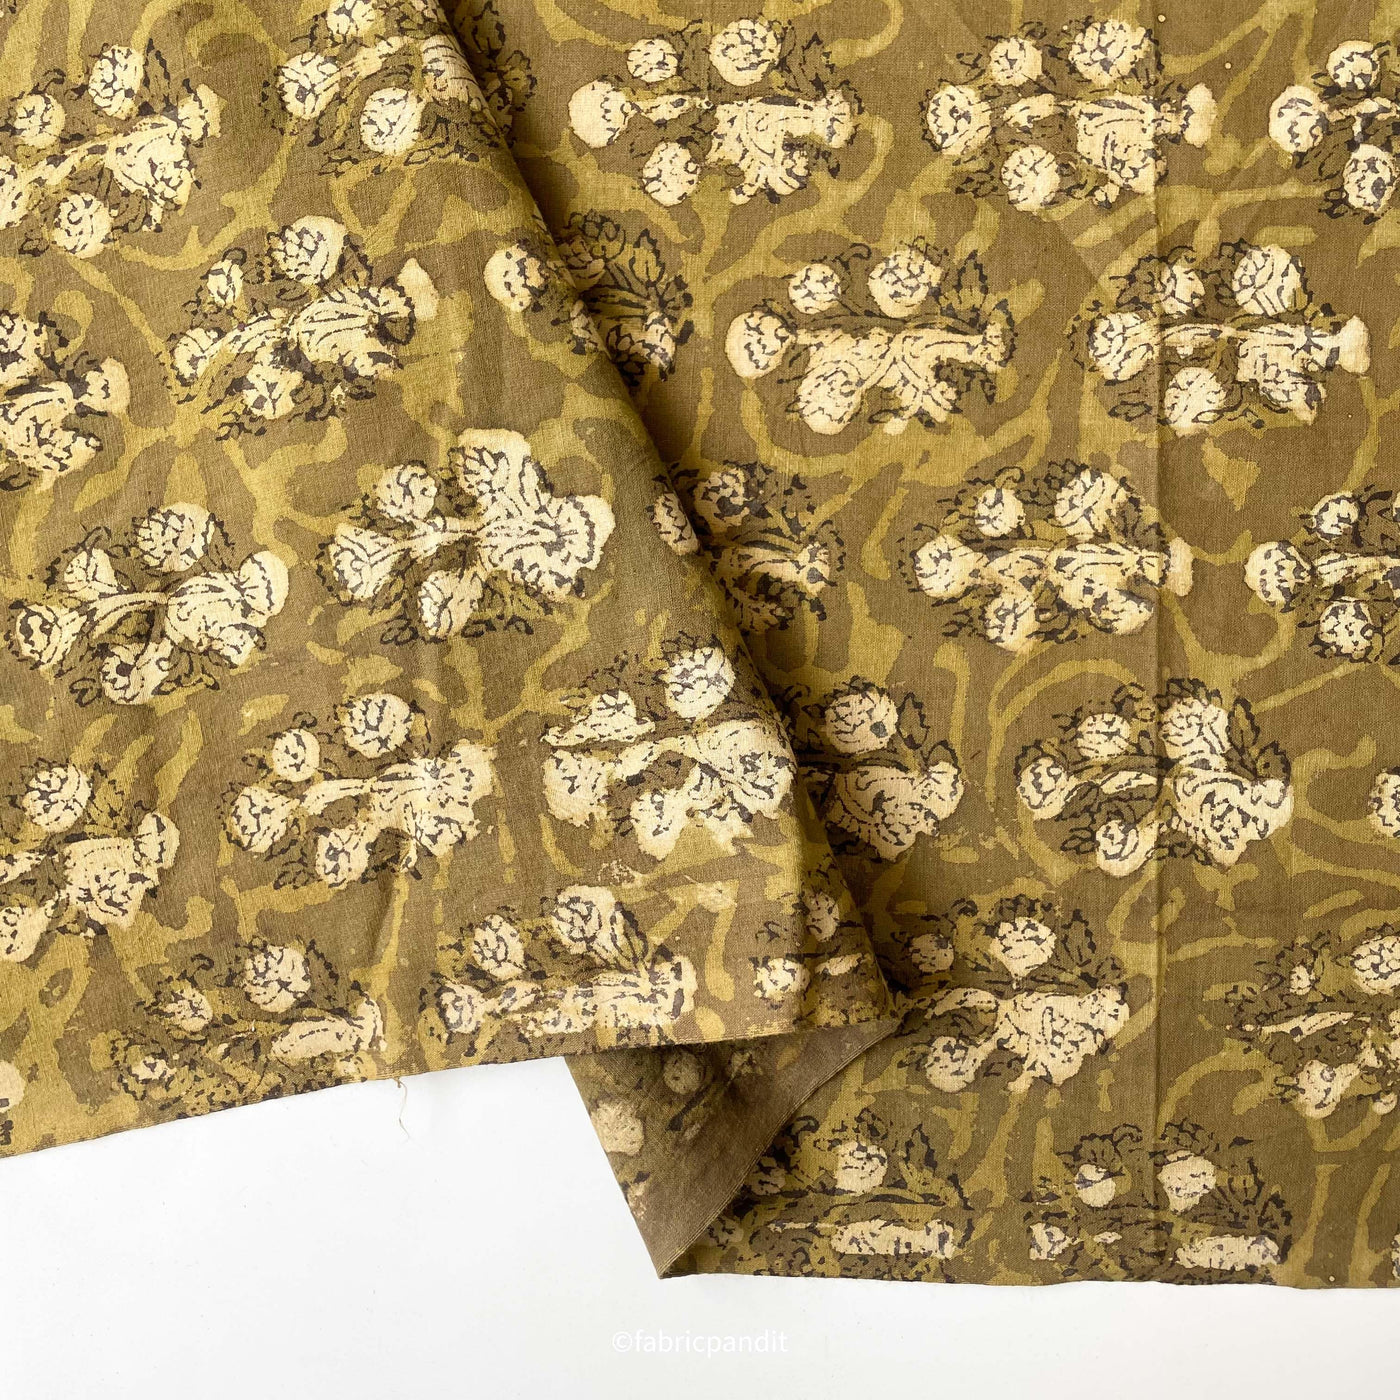 Fabric Pandit Fabric Dusty Olive Green Floral Bunch Hand Block Printed Pure Cotton Fabric (Width 42 inches)